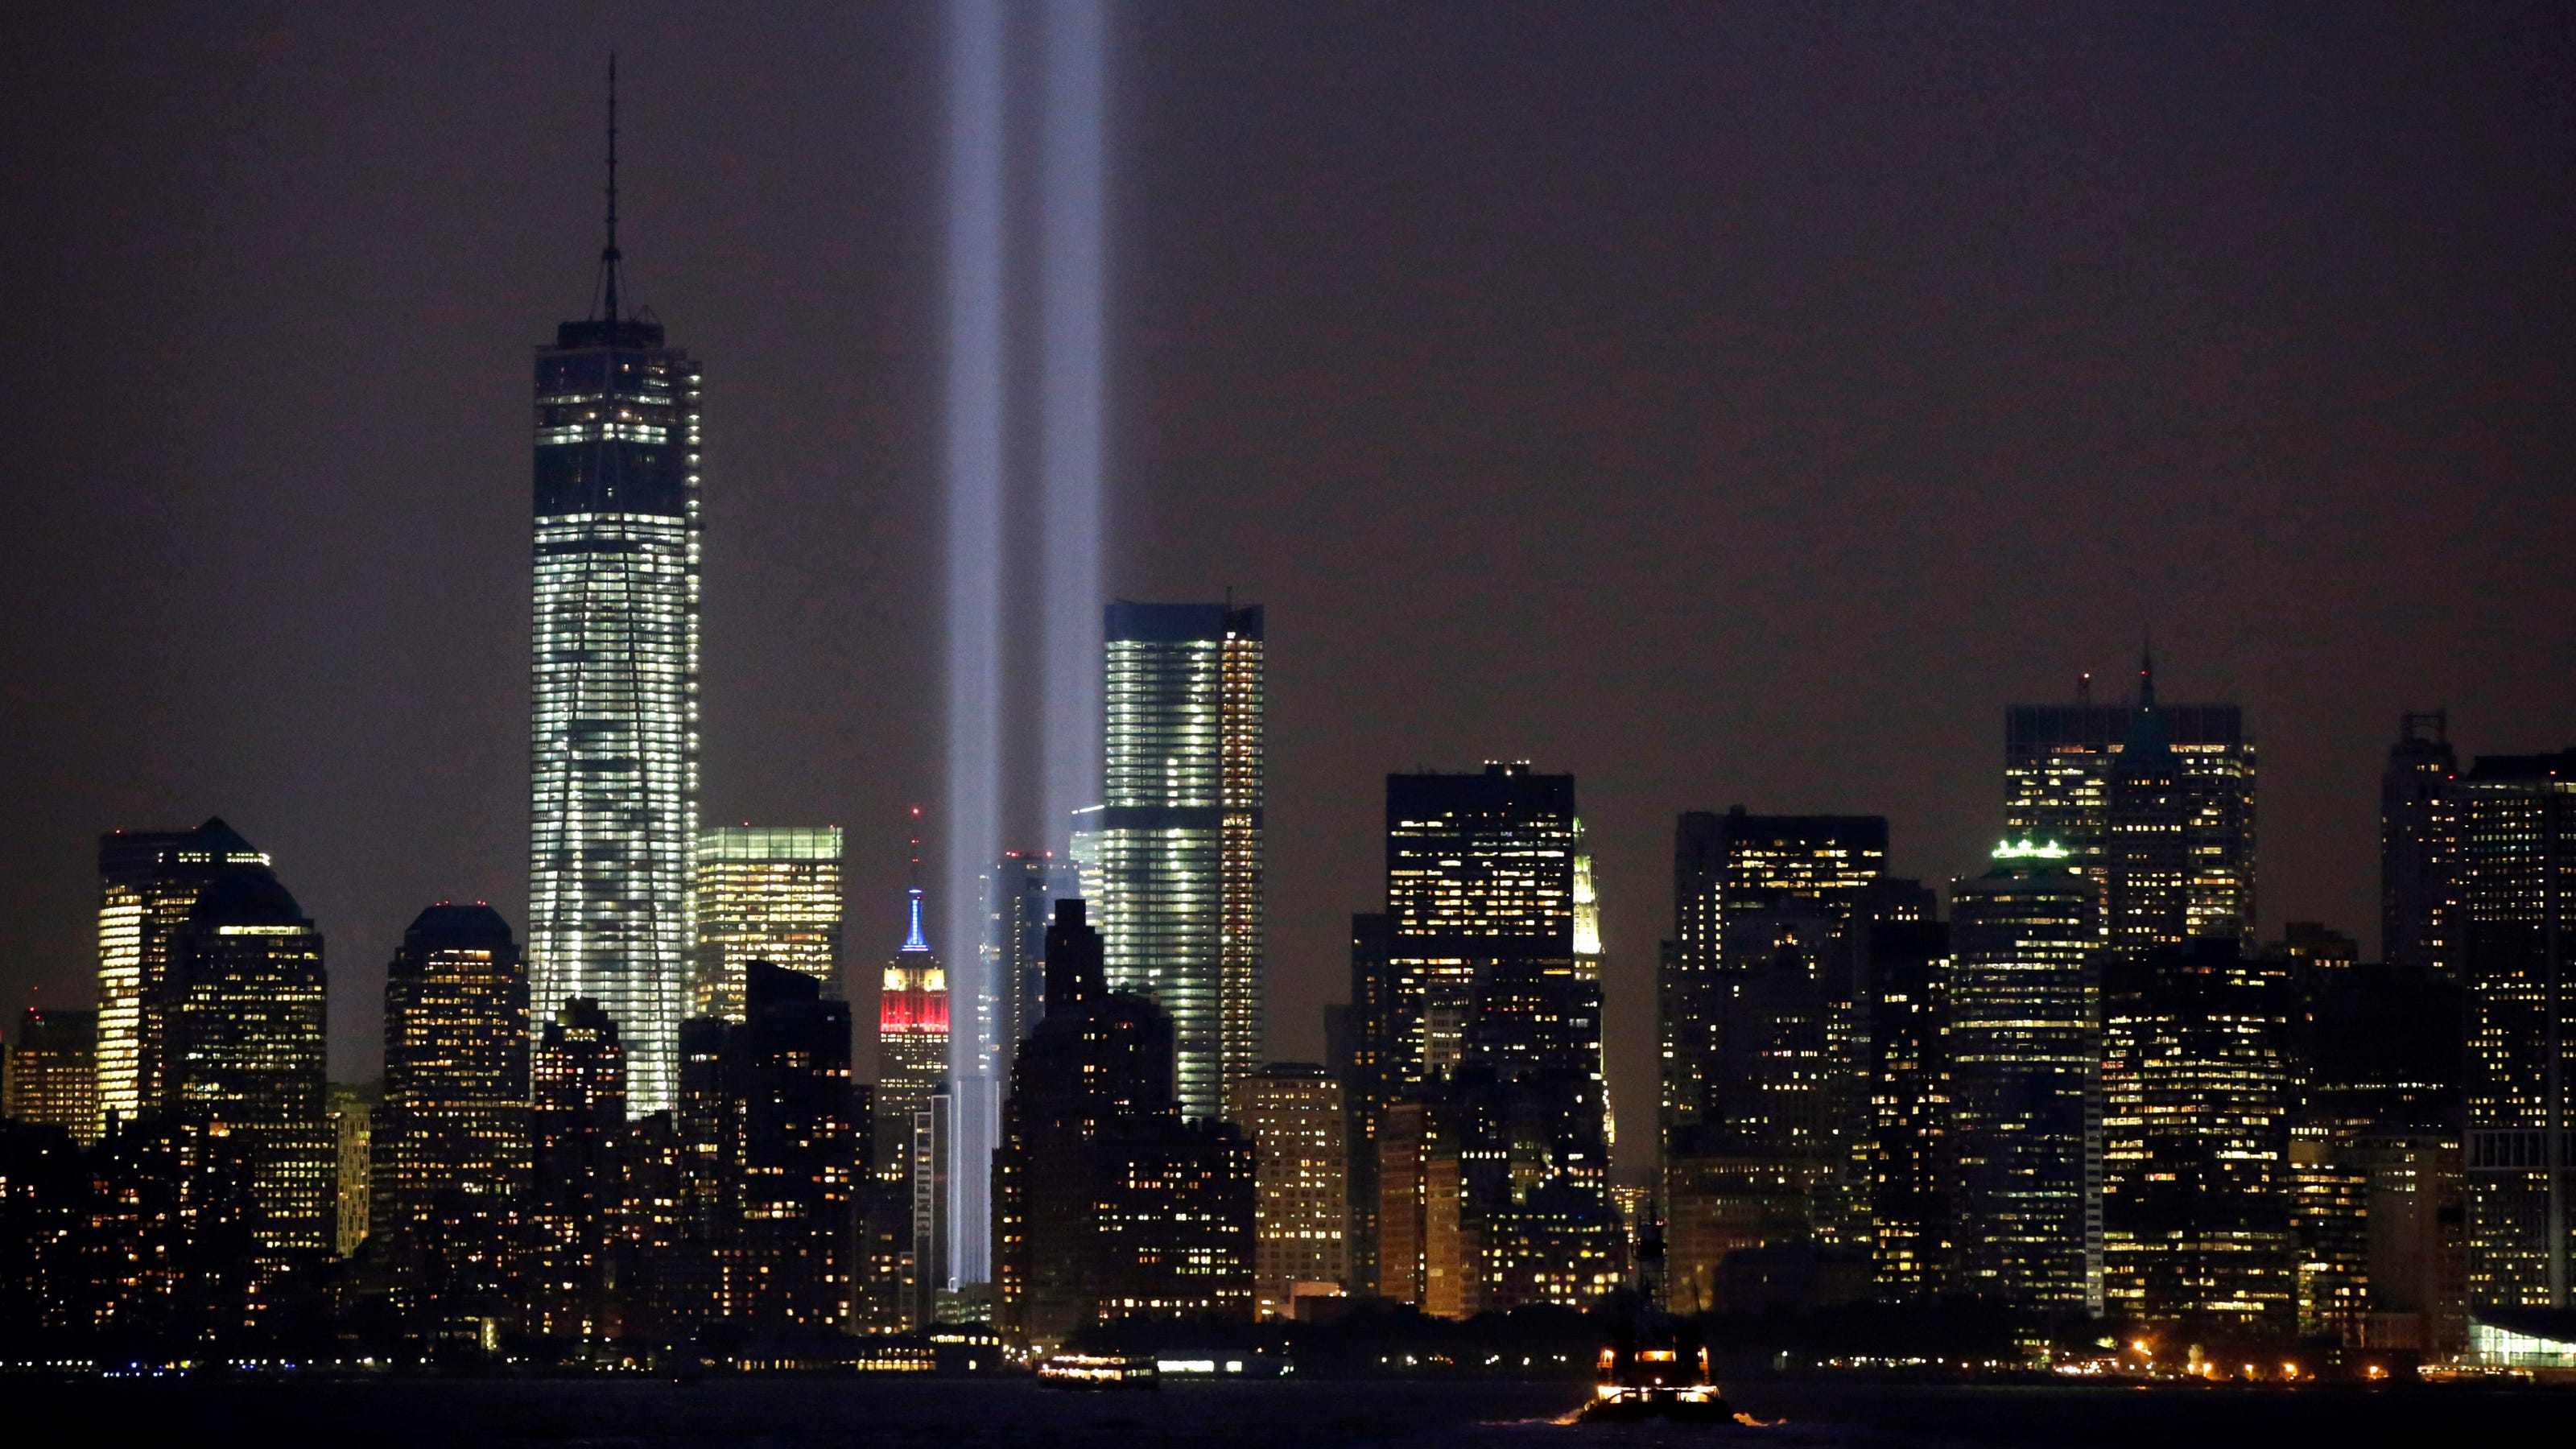 9/11 NYC Twin Towers light beam displays canceled amid COVID19